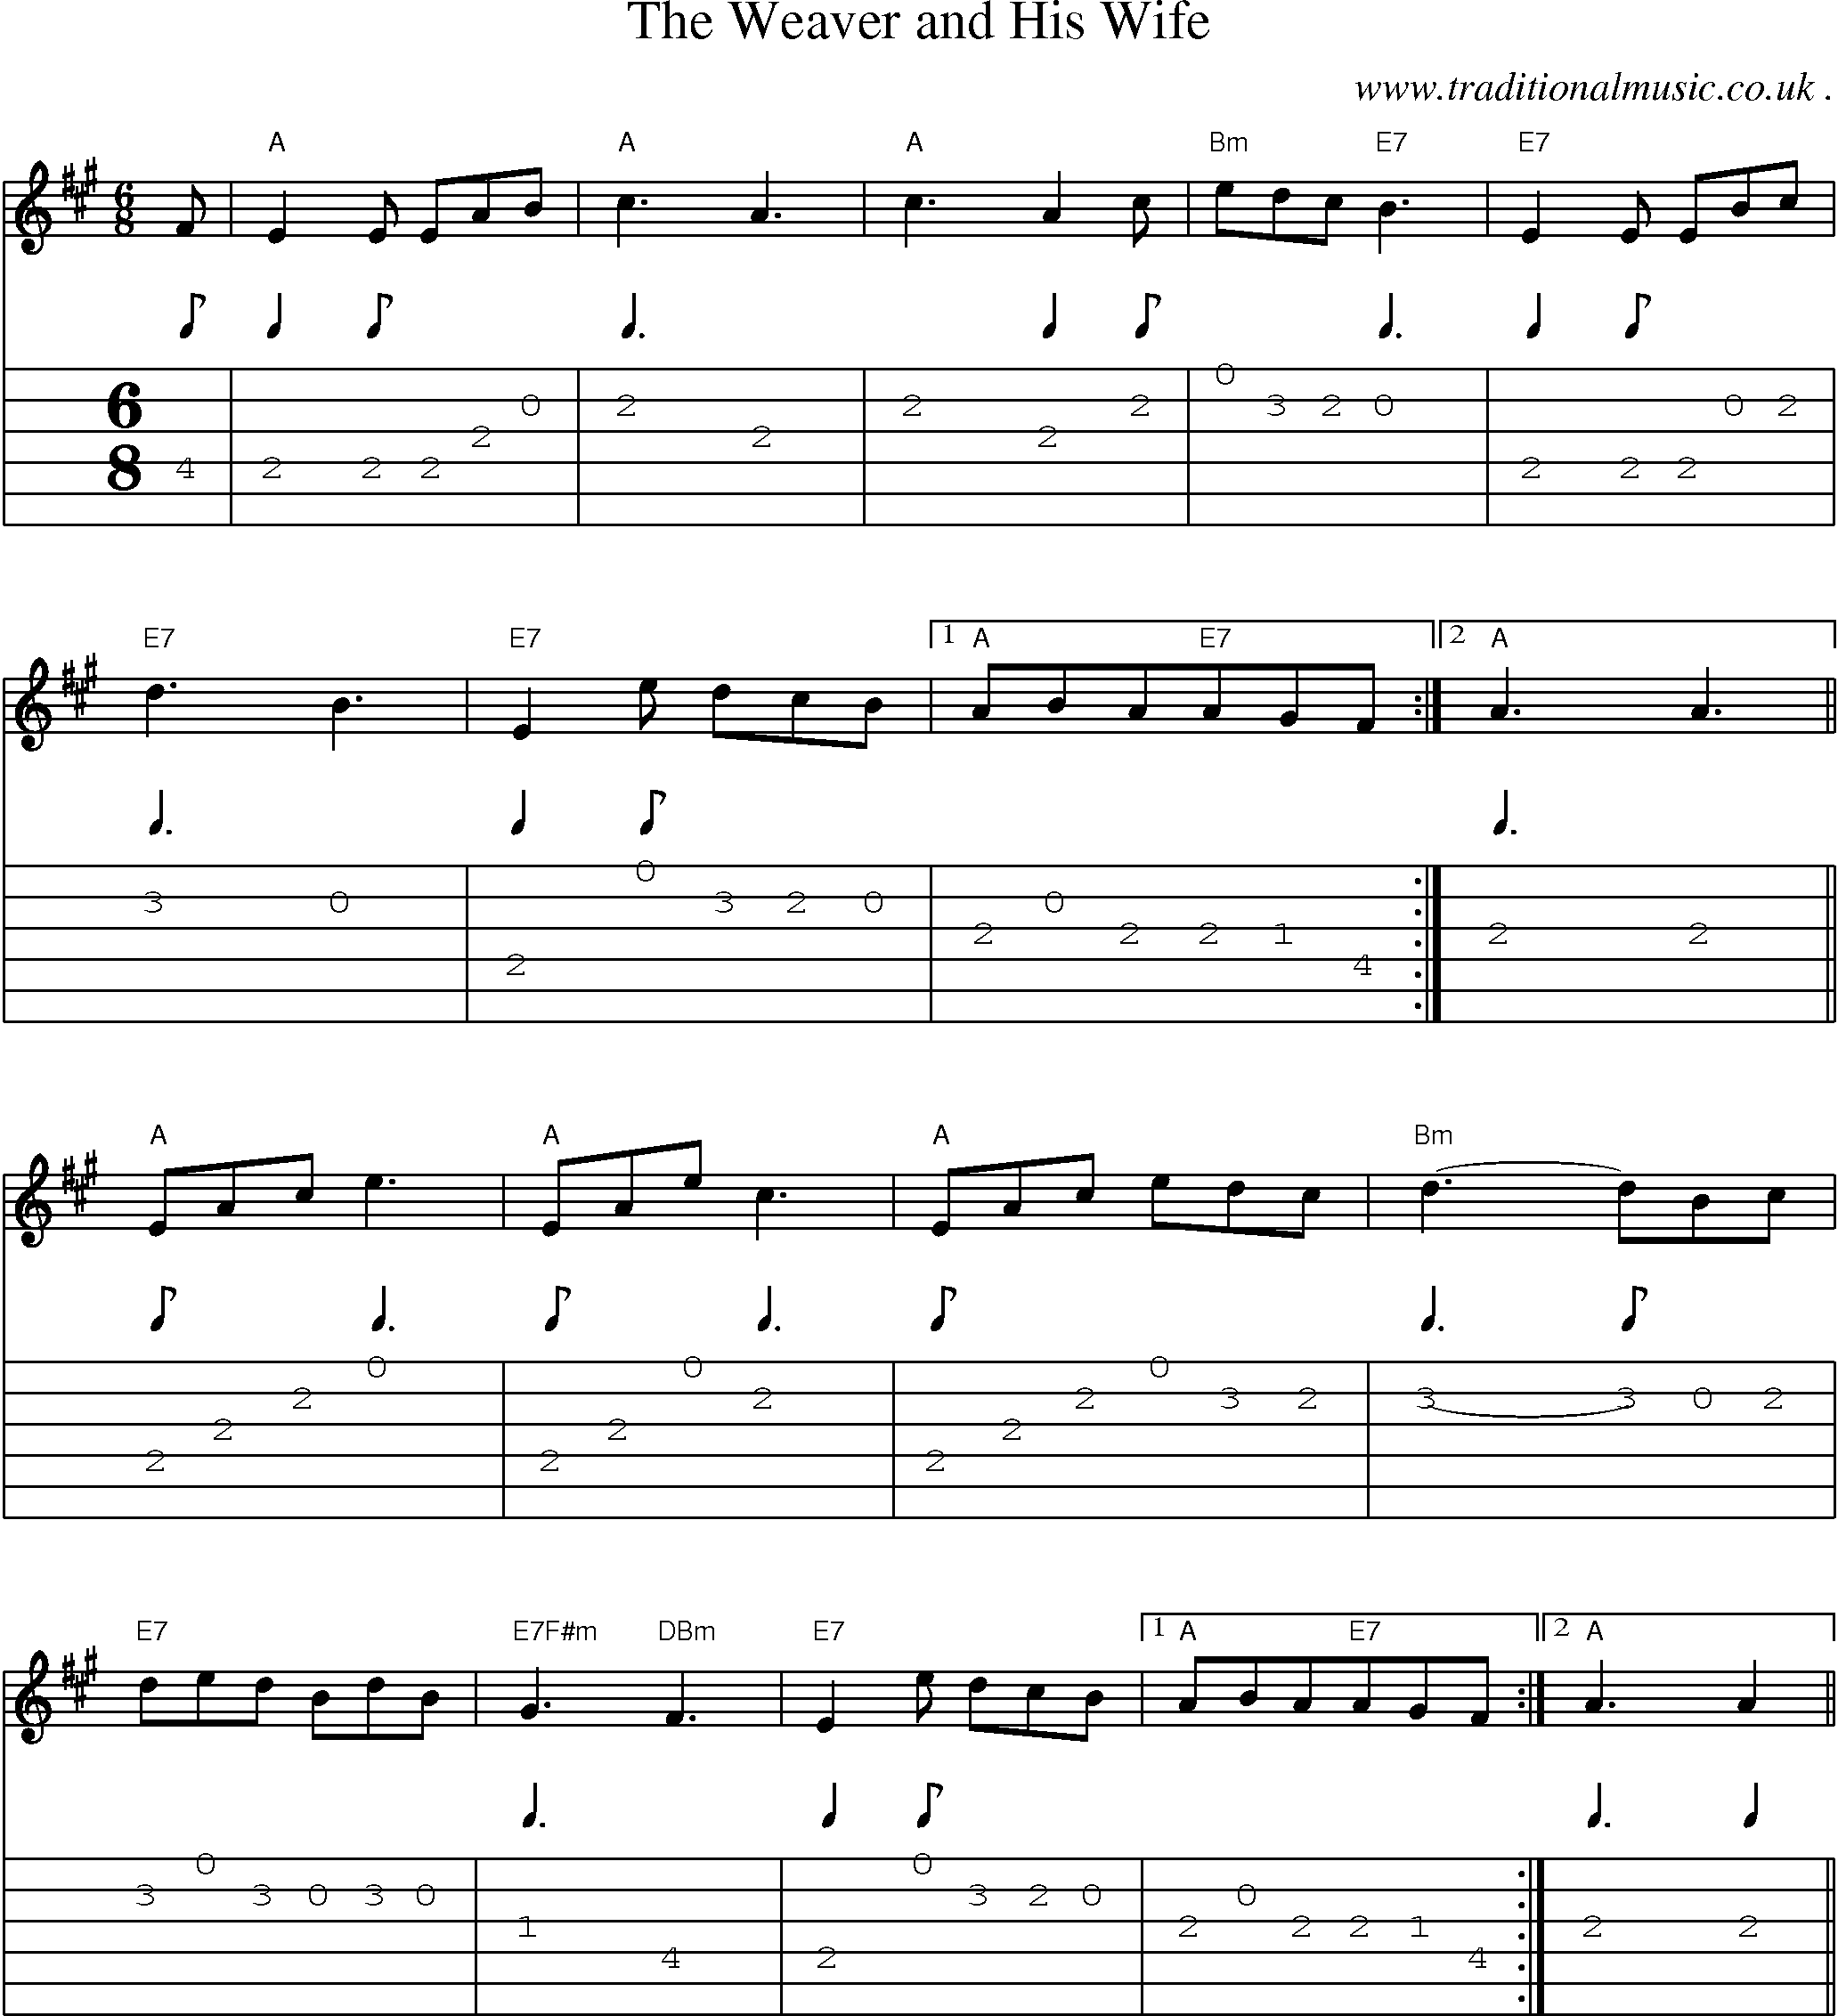 Sheet-Music and Guitar Tabs for The Weaver And His Wife